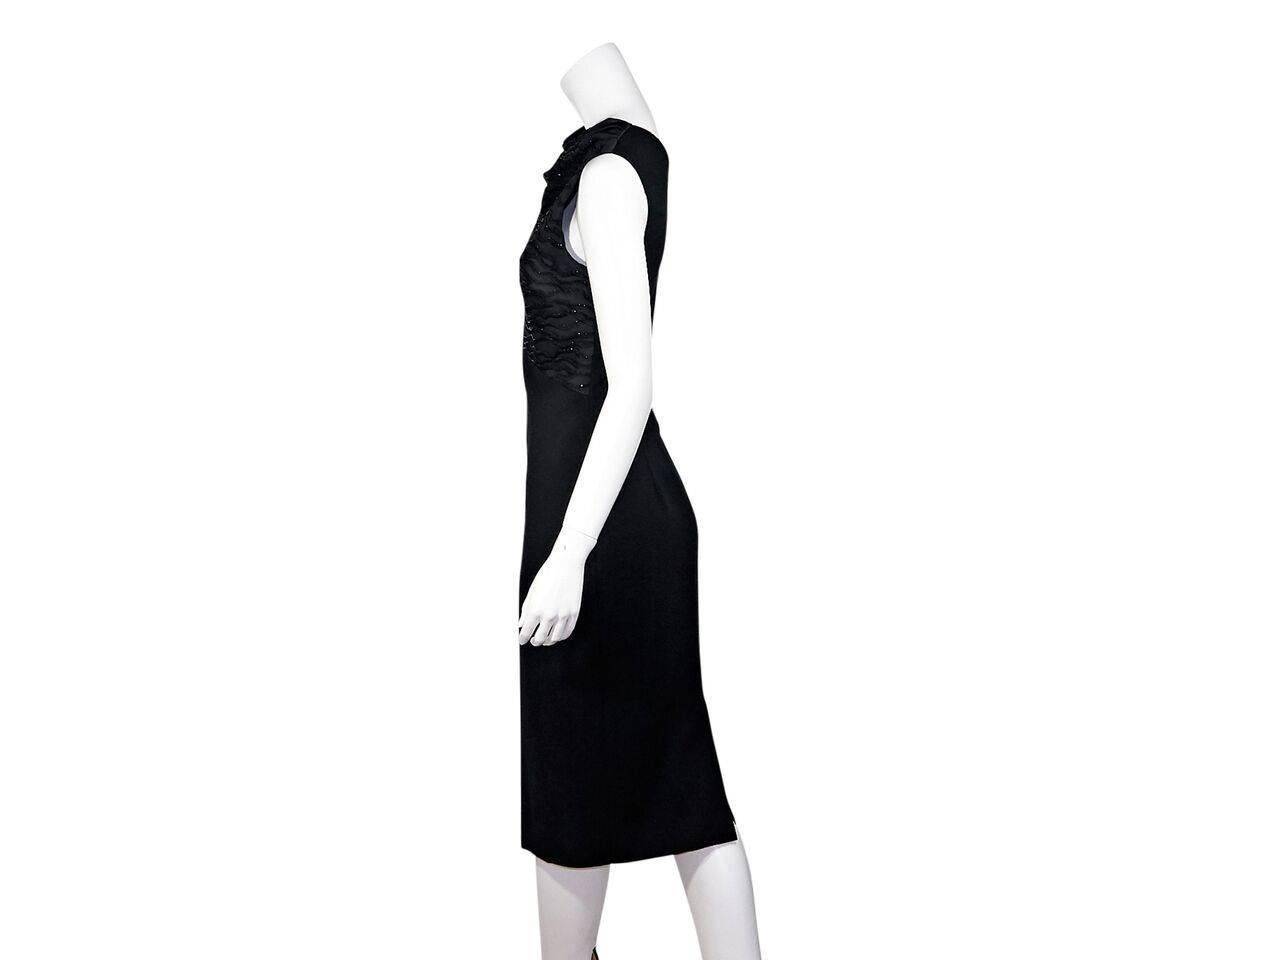 Product details:  Black sheath dress by Jason Wu.  Cowlneck.  Beaded bodice.  Sleeveless.  Concealed back zip closure.  Back center hem vent. 
Condition: Pre-owned. Very good.
Est. Retail $ 1,695.00